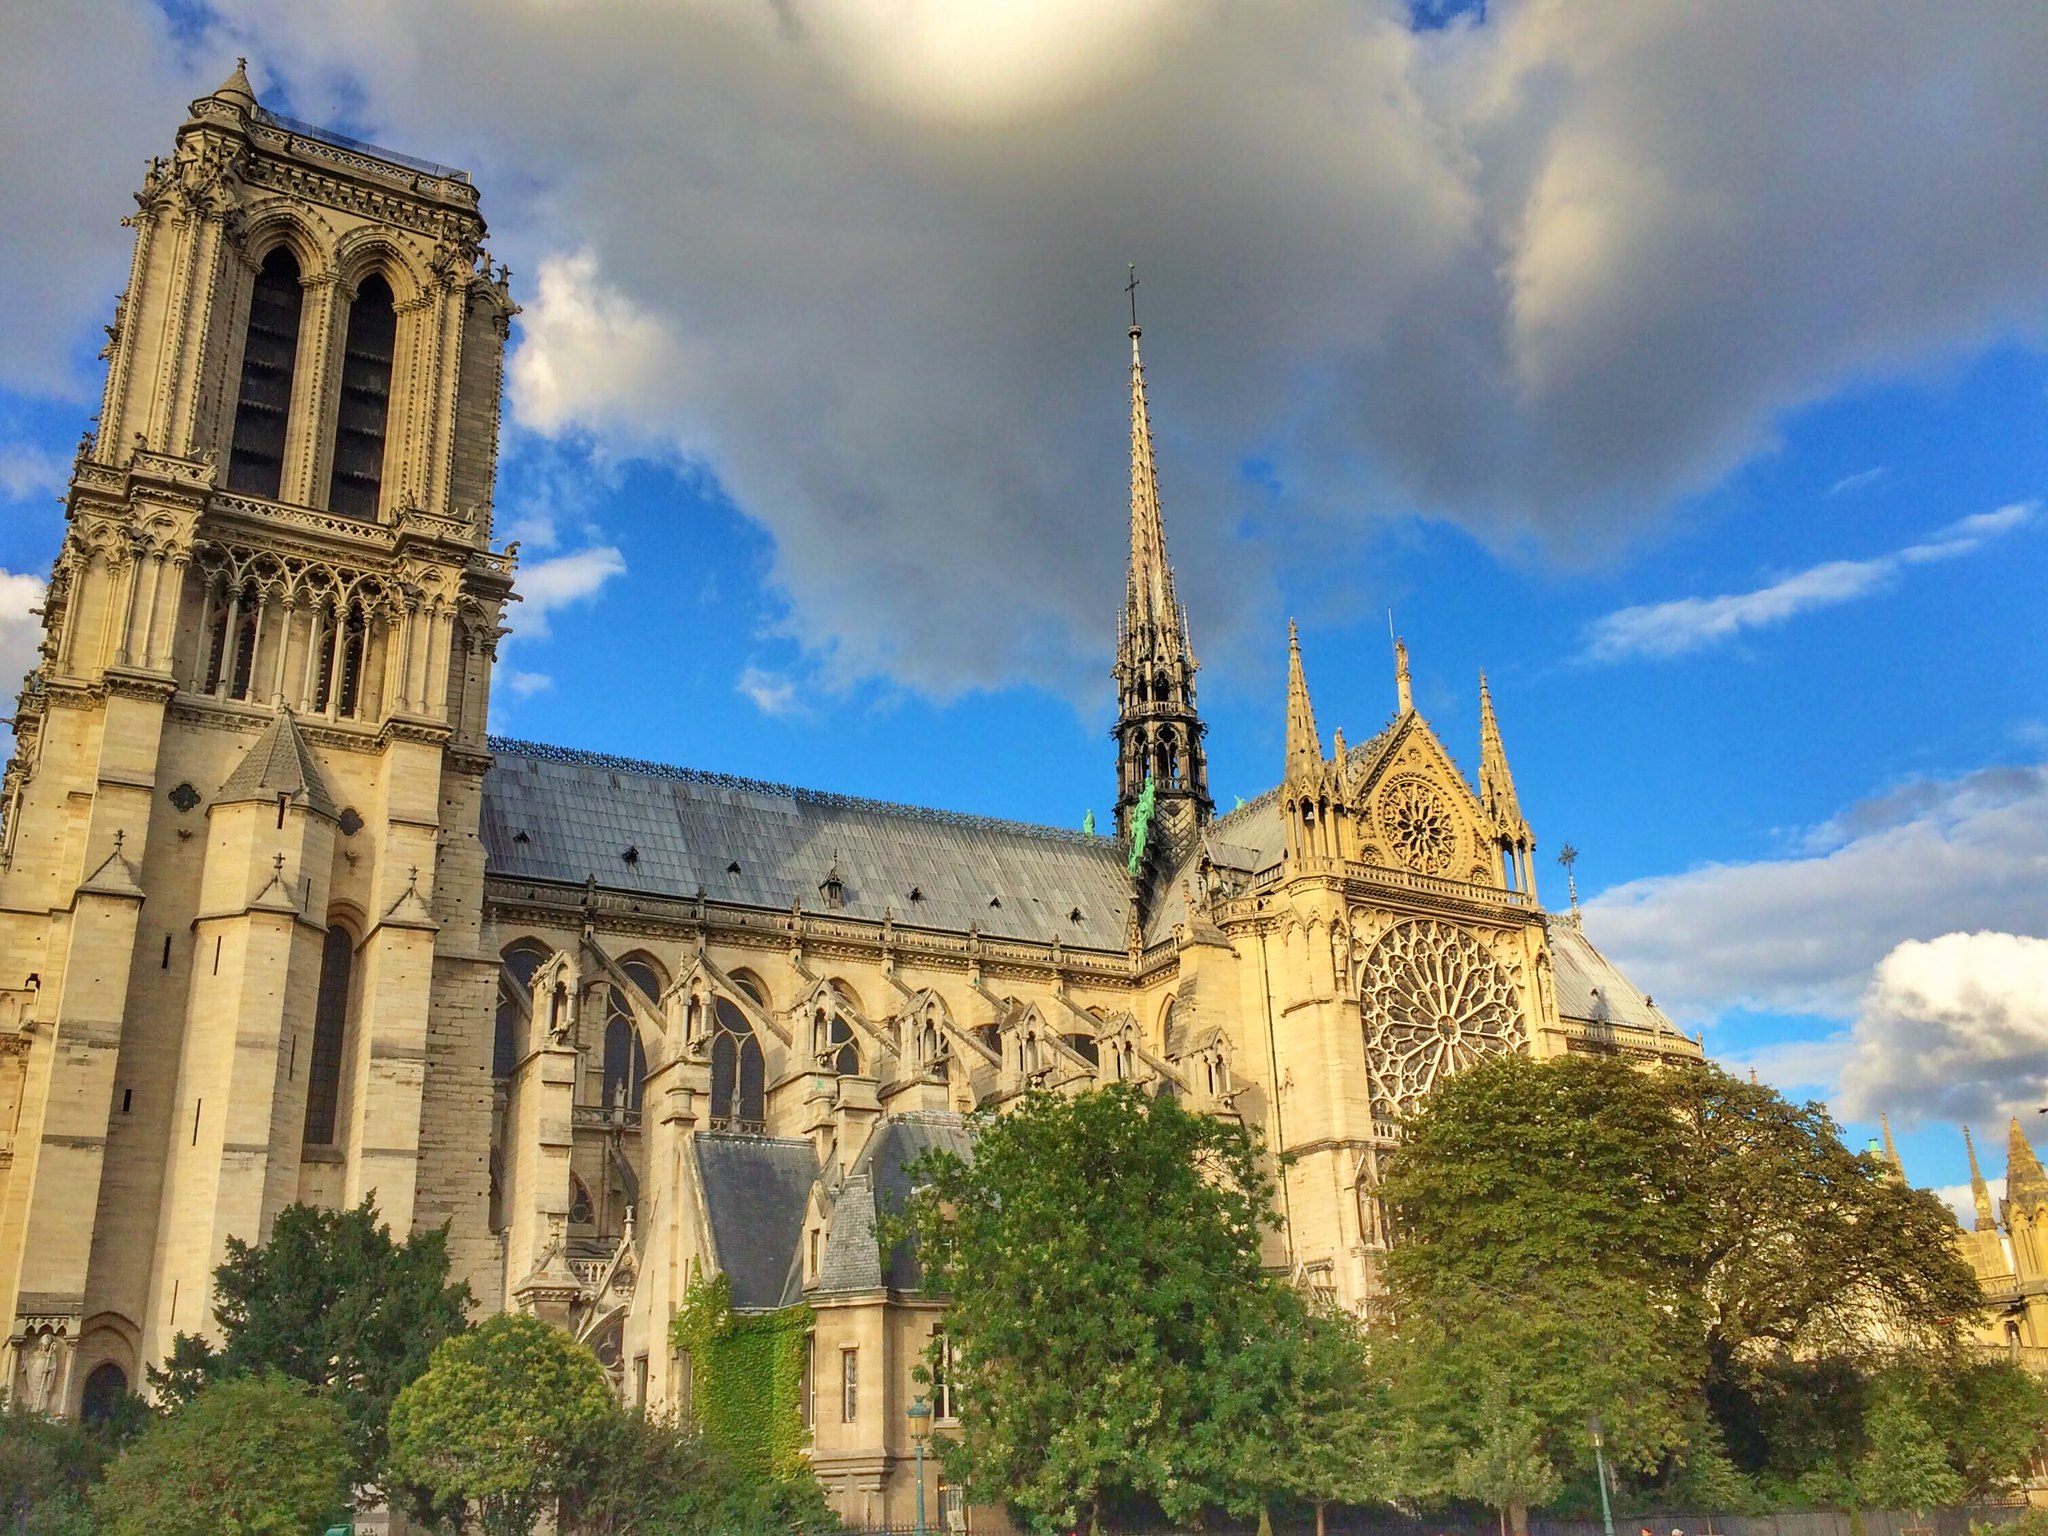 The Notre Dame cathedral in Paris photographed in 2015 from the side